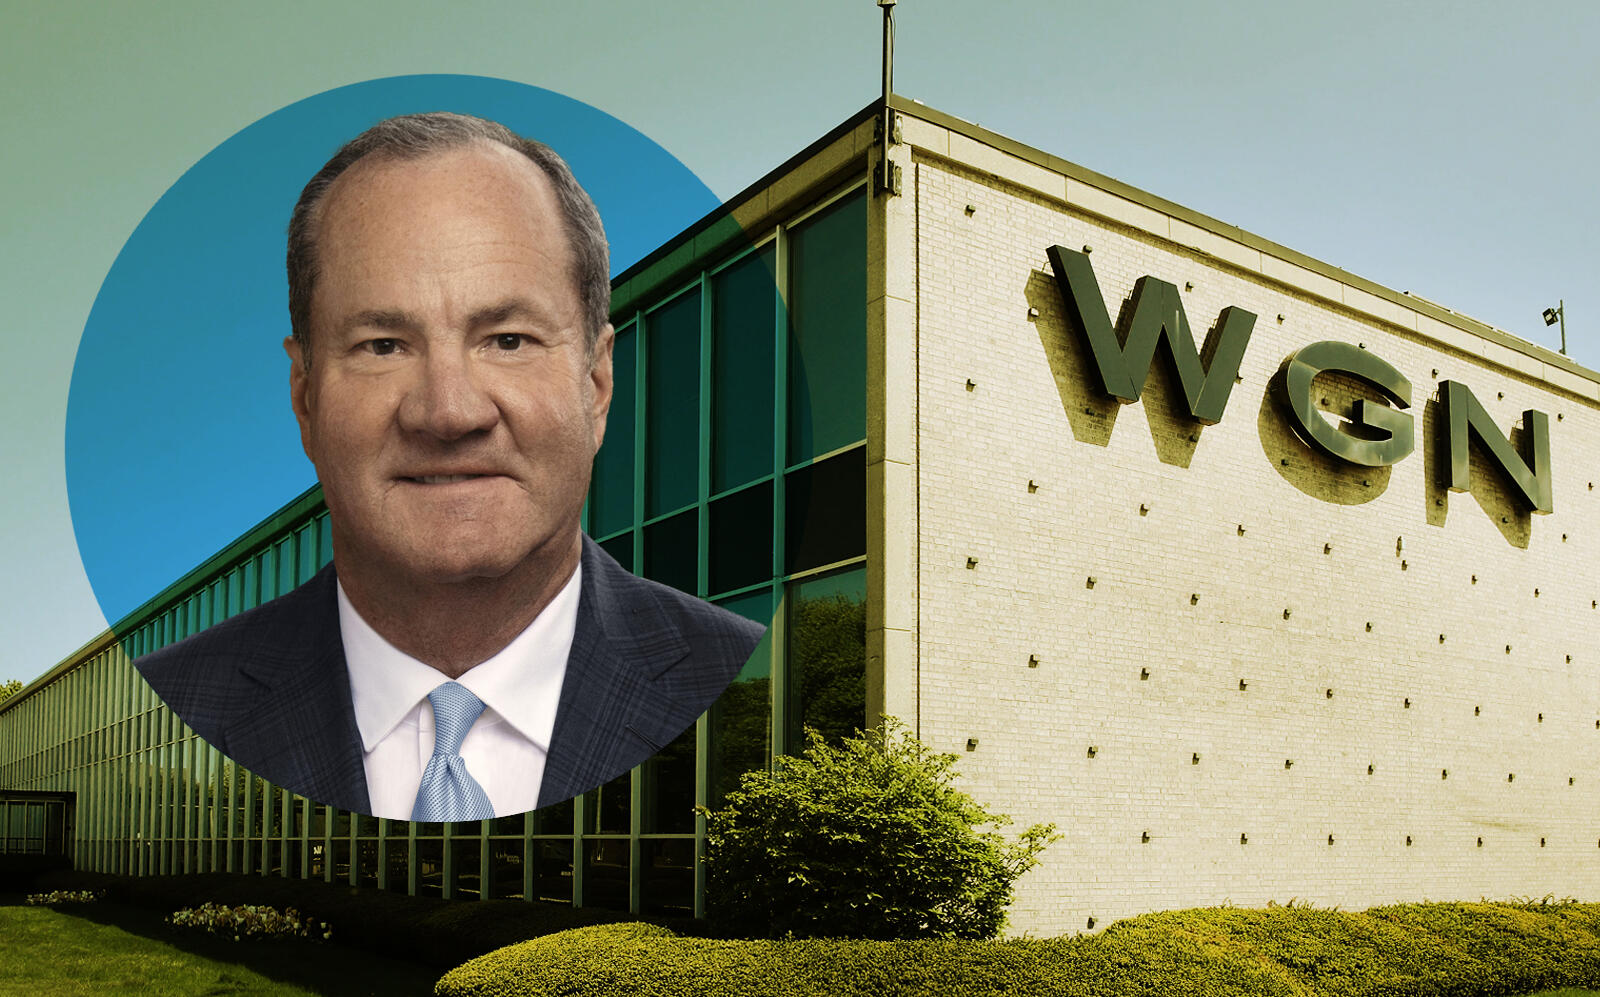 The WGN-TV building and Hines CEO Jeffrey Hines (WGN-TV, Hines)